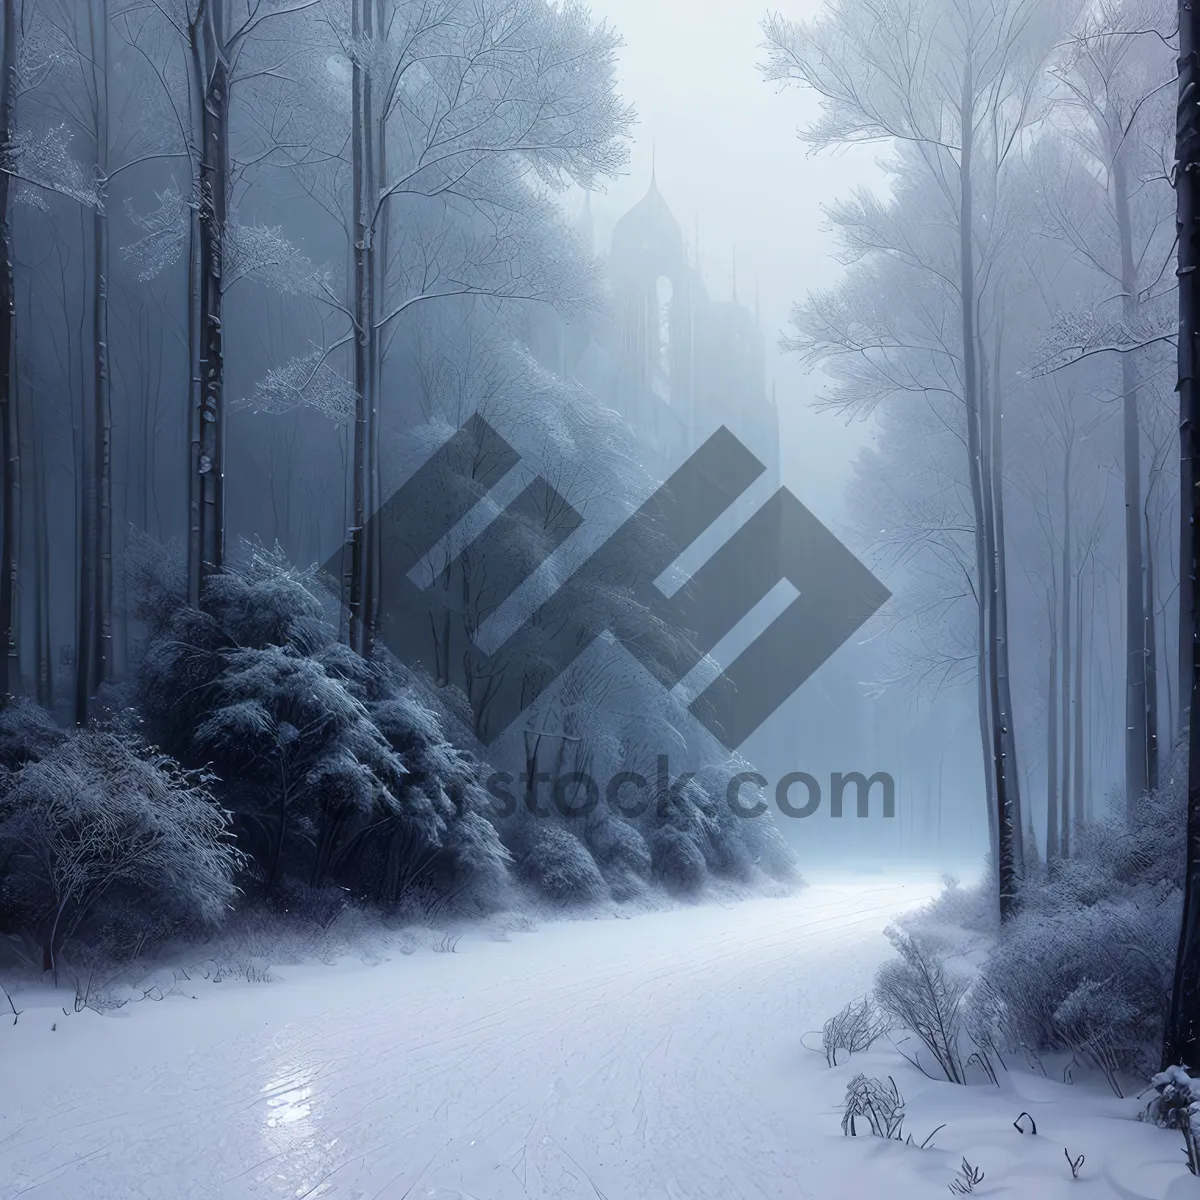 Picture of Frosty Winter Wonderland in Snowy Forest